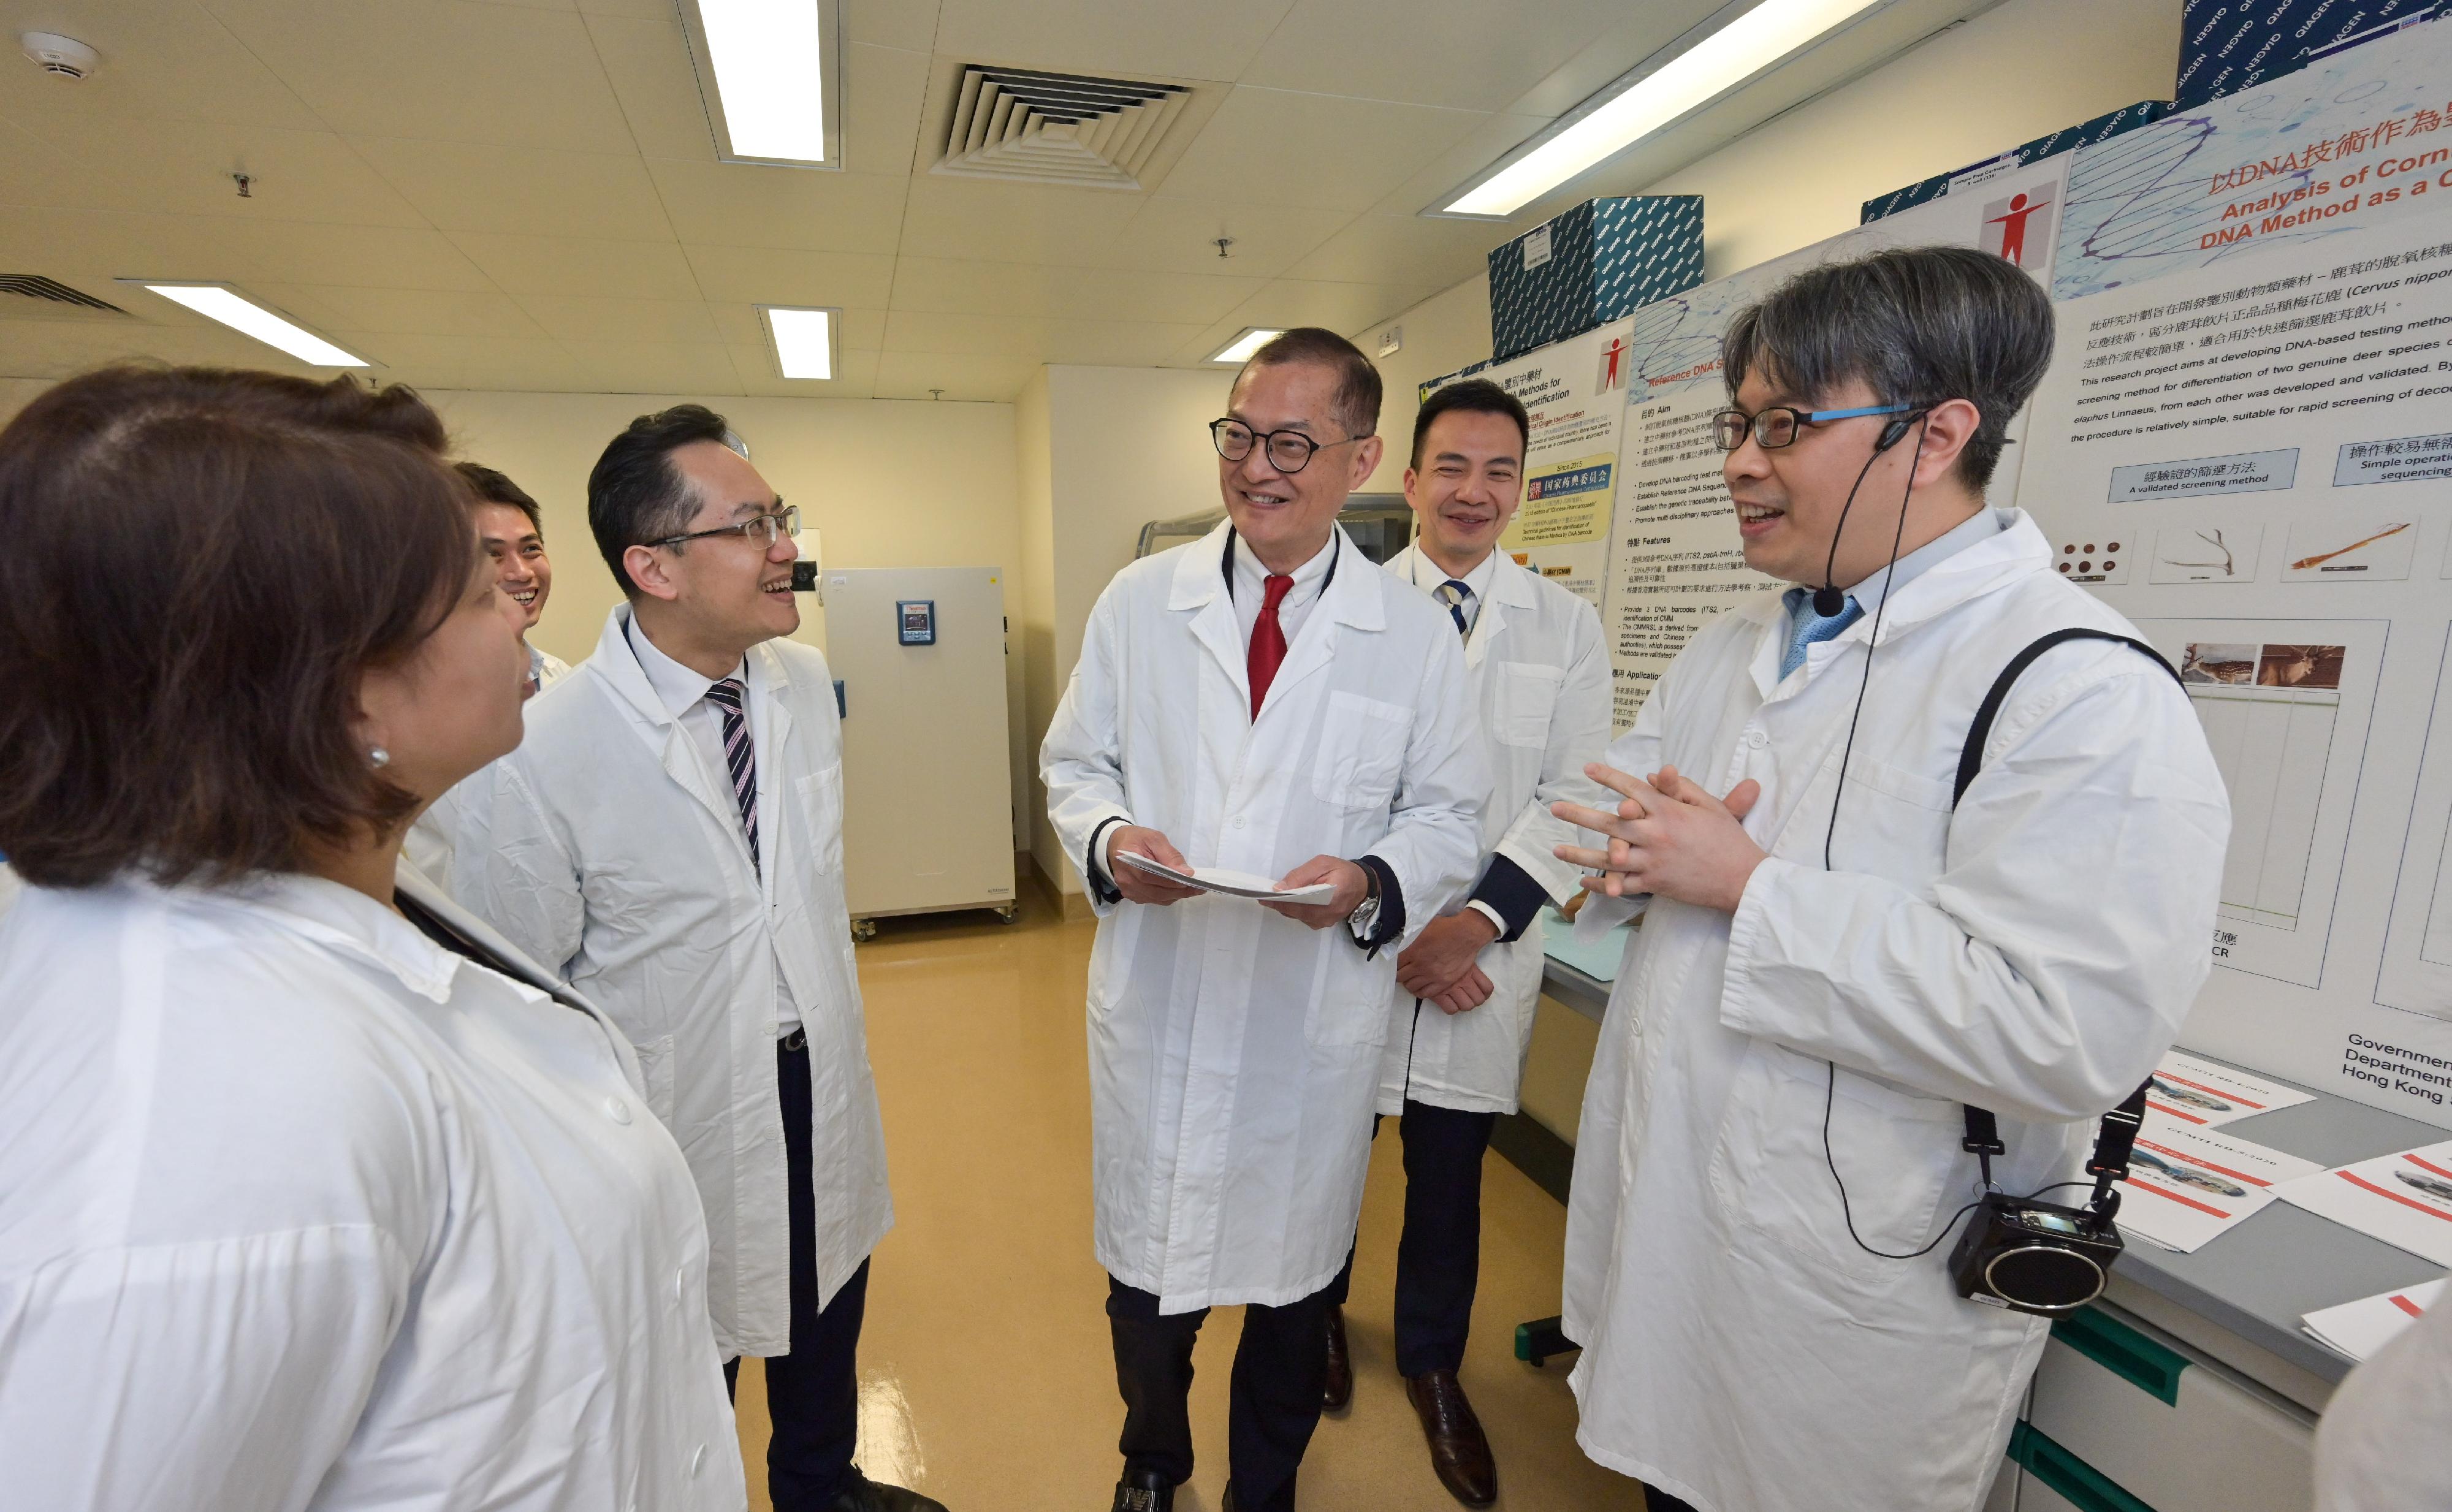 The Secretary for Health, Professor Lo Chung-mau, today (March 26) attended the launch ceremony of the Department of Health's new dedicated website Digital Herbarium for Chinese Medicines. Photo shows Professor Lo (third right), accompanied by the Director of Health, Dr Ronald Lam (fourth right), visiting the Government Chinese Medicines Testing Institute of the Department of Health, which is located in Hong Kong Science Park.